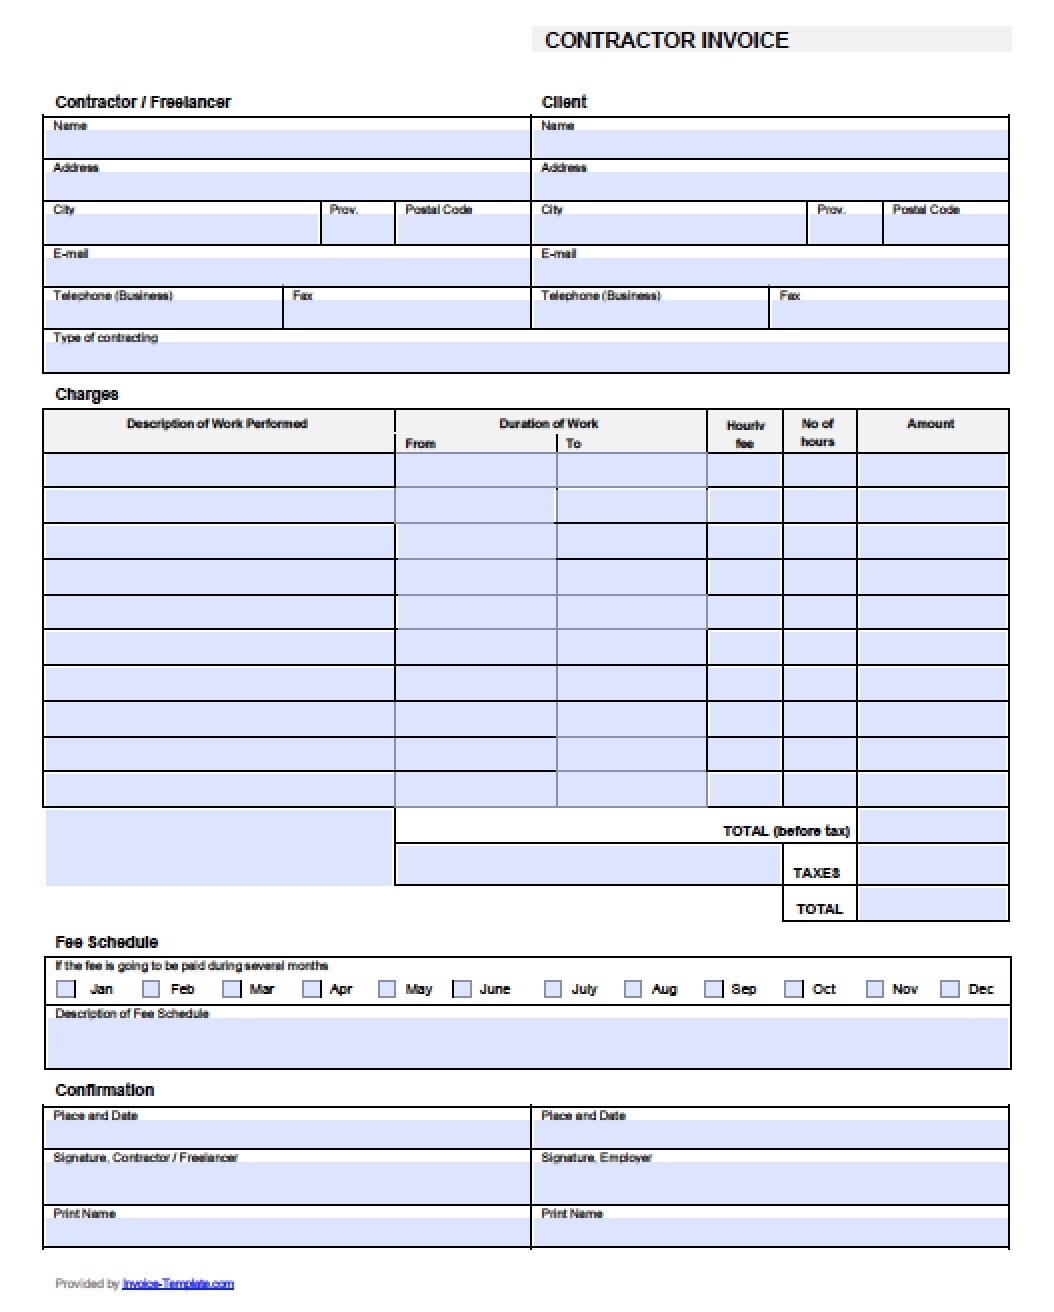 free contractor invoice template excel pdf word doc contractor invoice templates